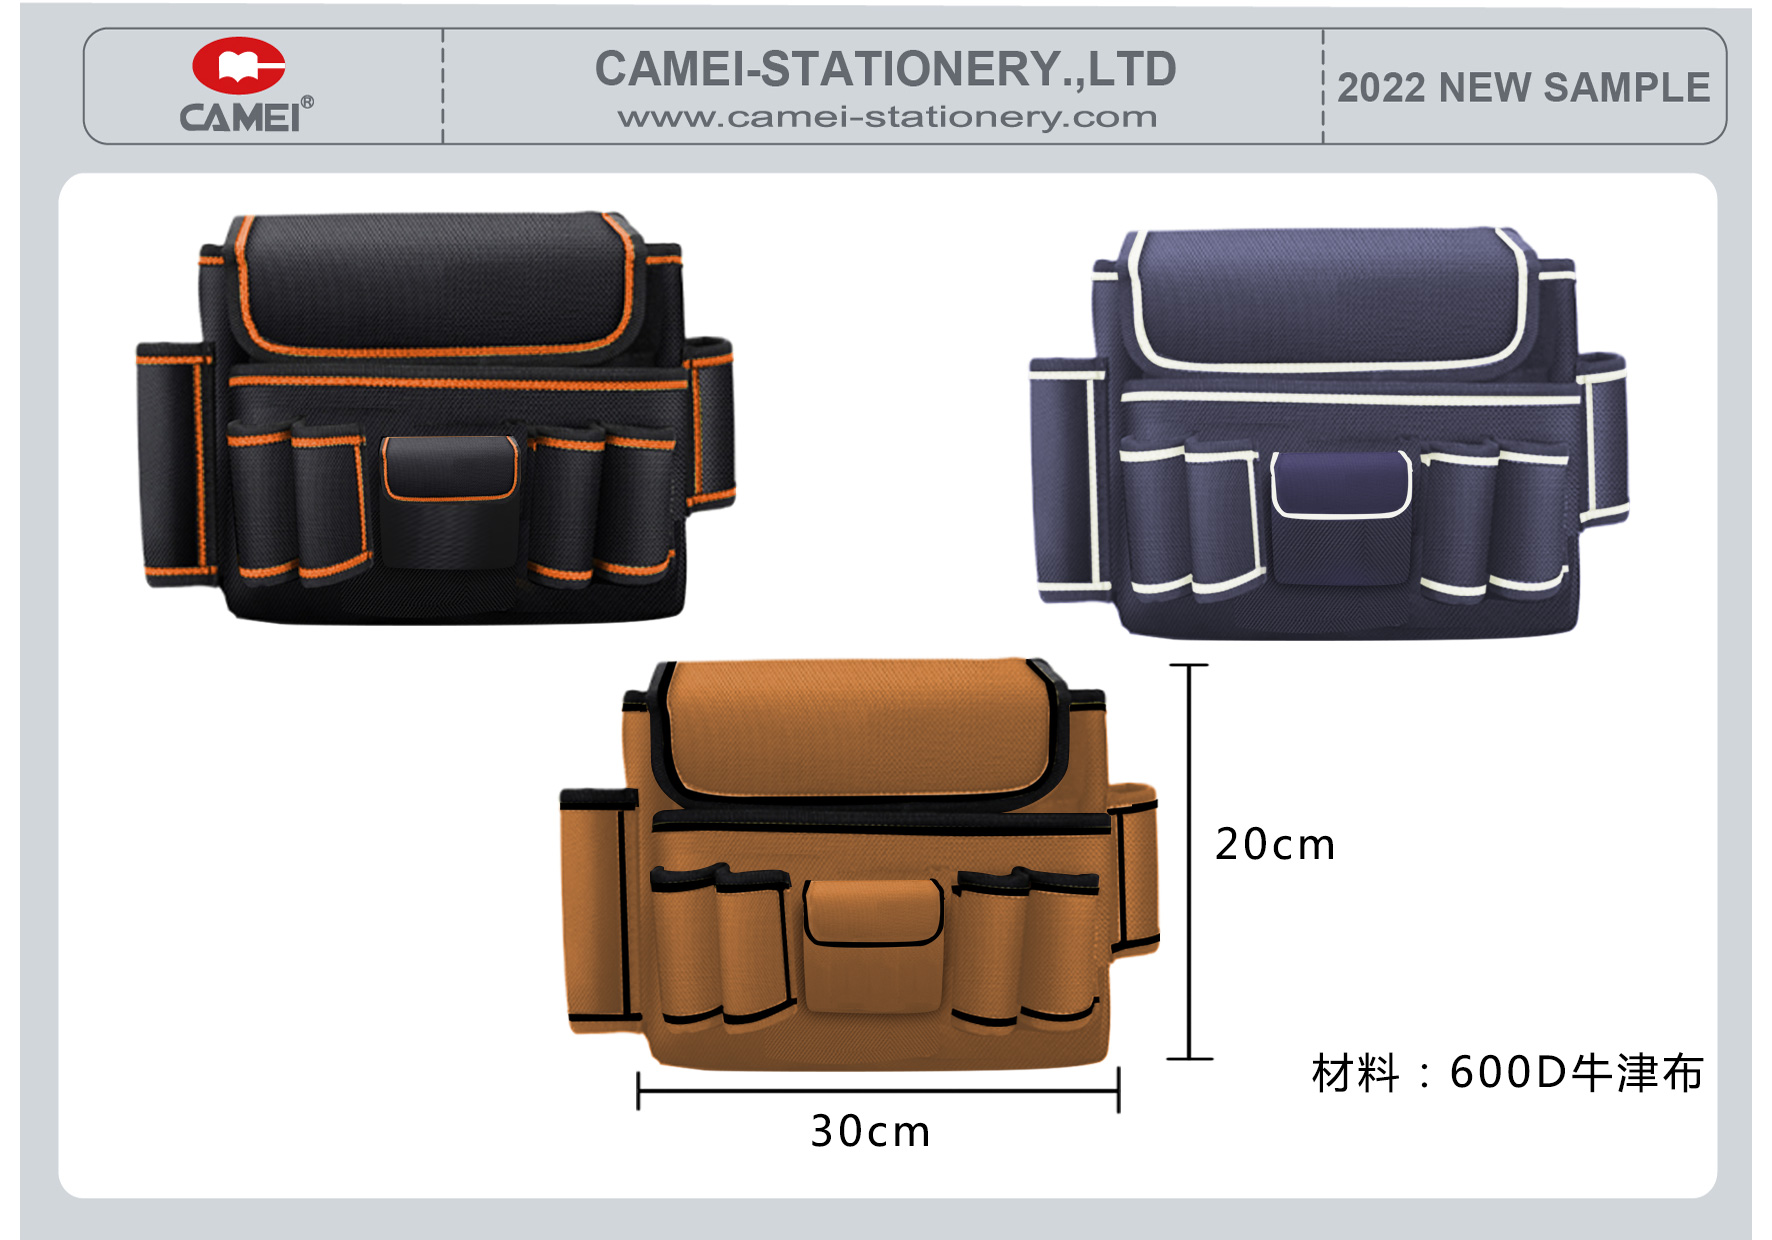 Reasonable price for Custom Canvas Case - New design heavy duty 600D oxford tool bag belt multi compartments of different sizes and depth gardening apron waist bag – CAMEI